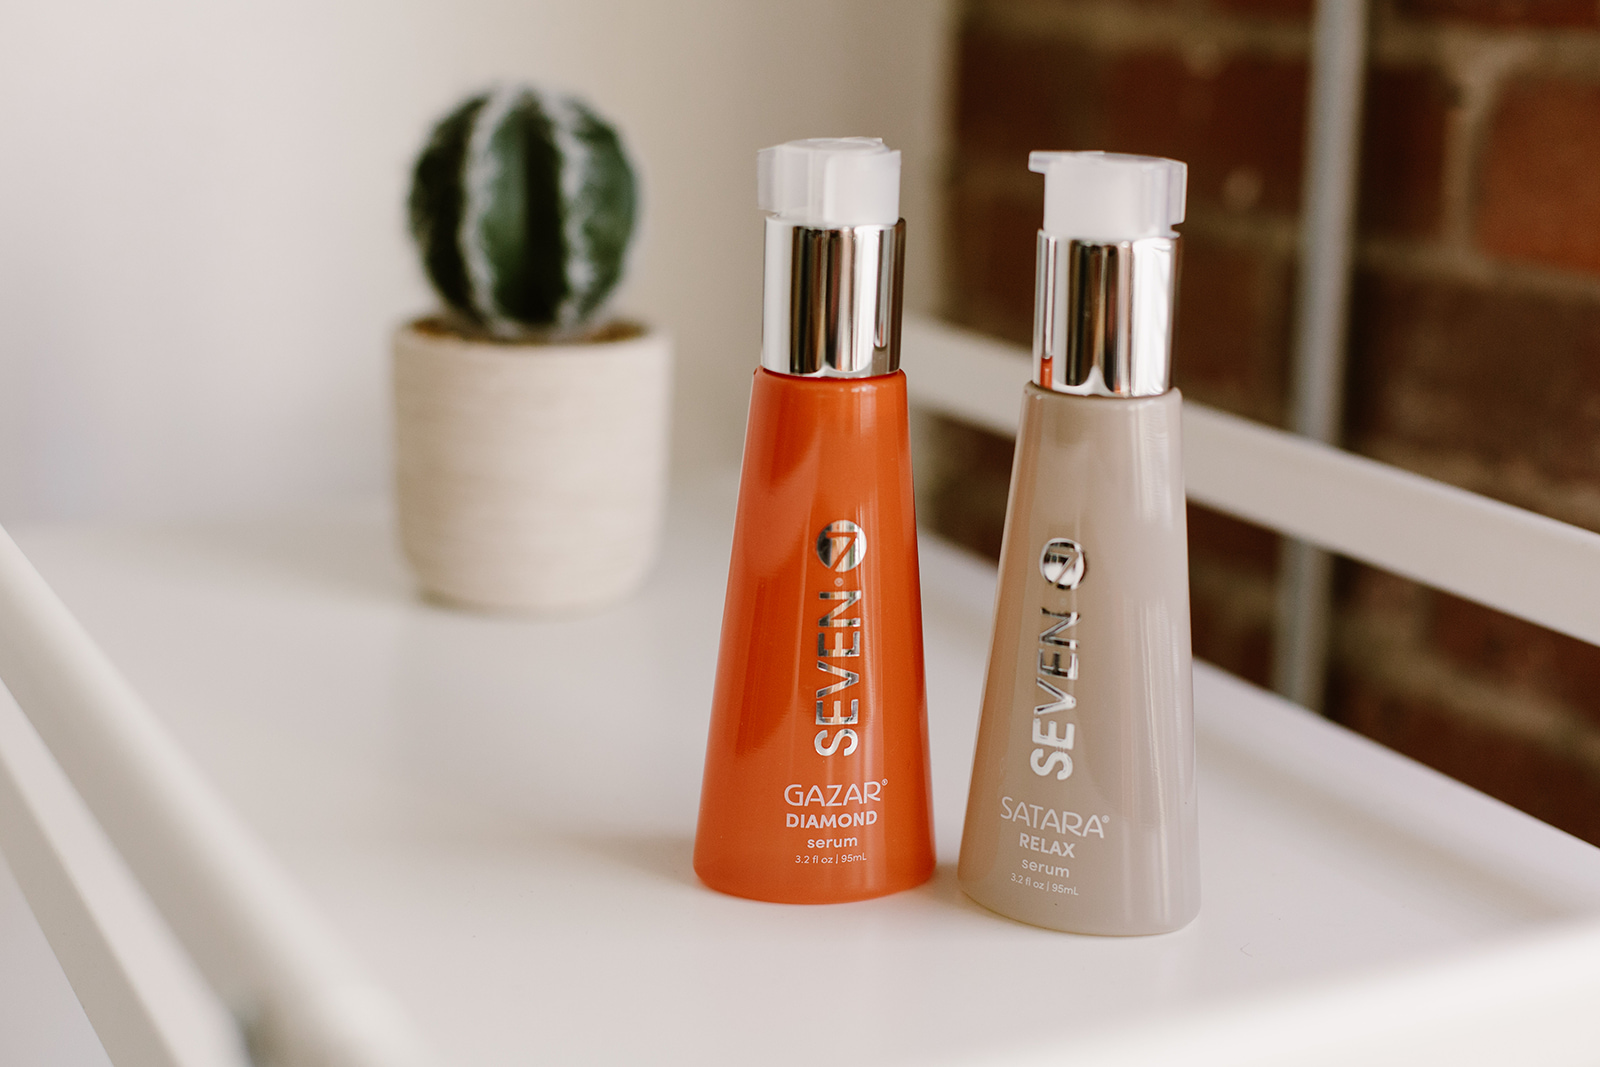 Shampoo and conditioner designed to keep the shine in your hair